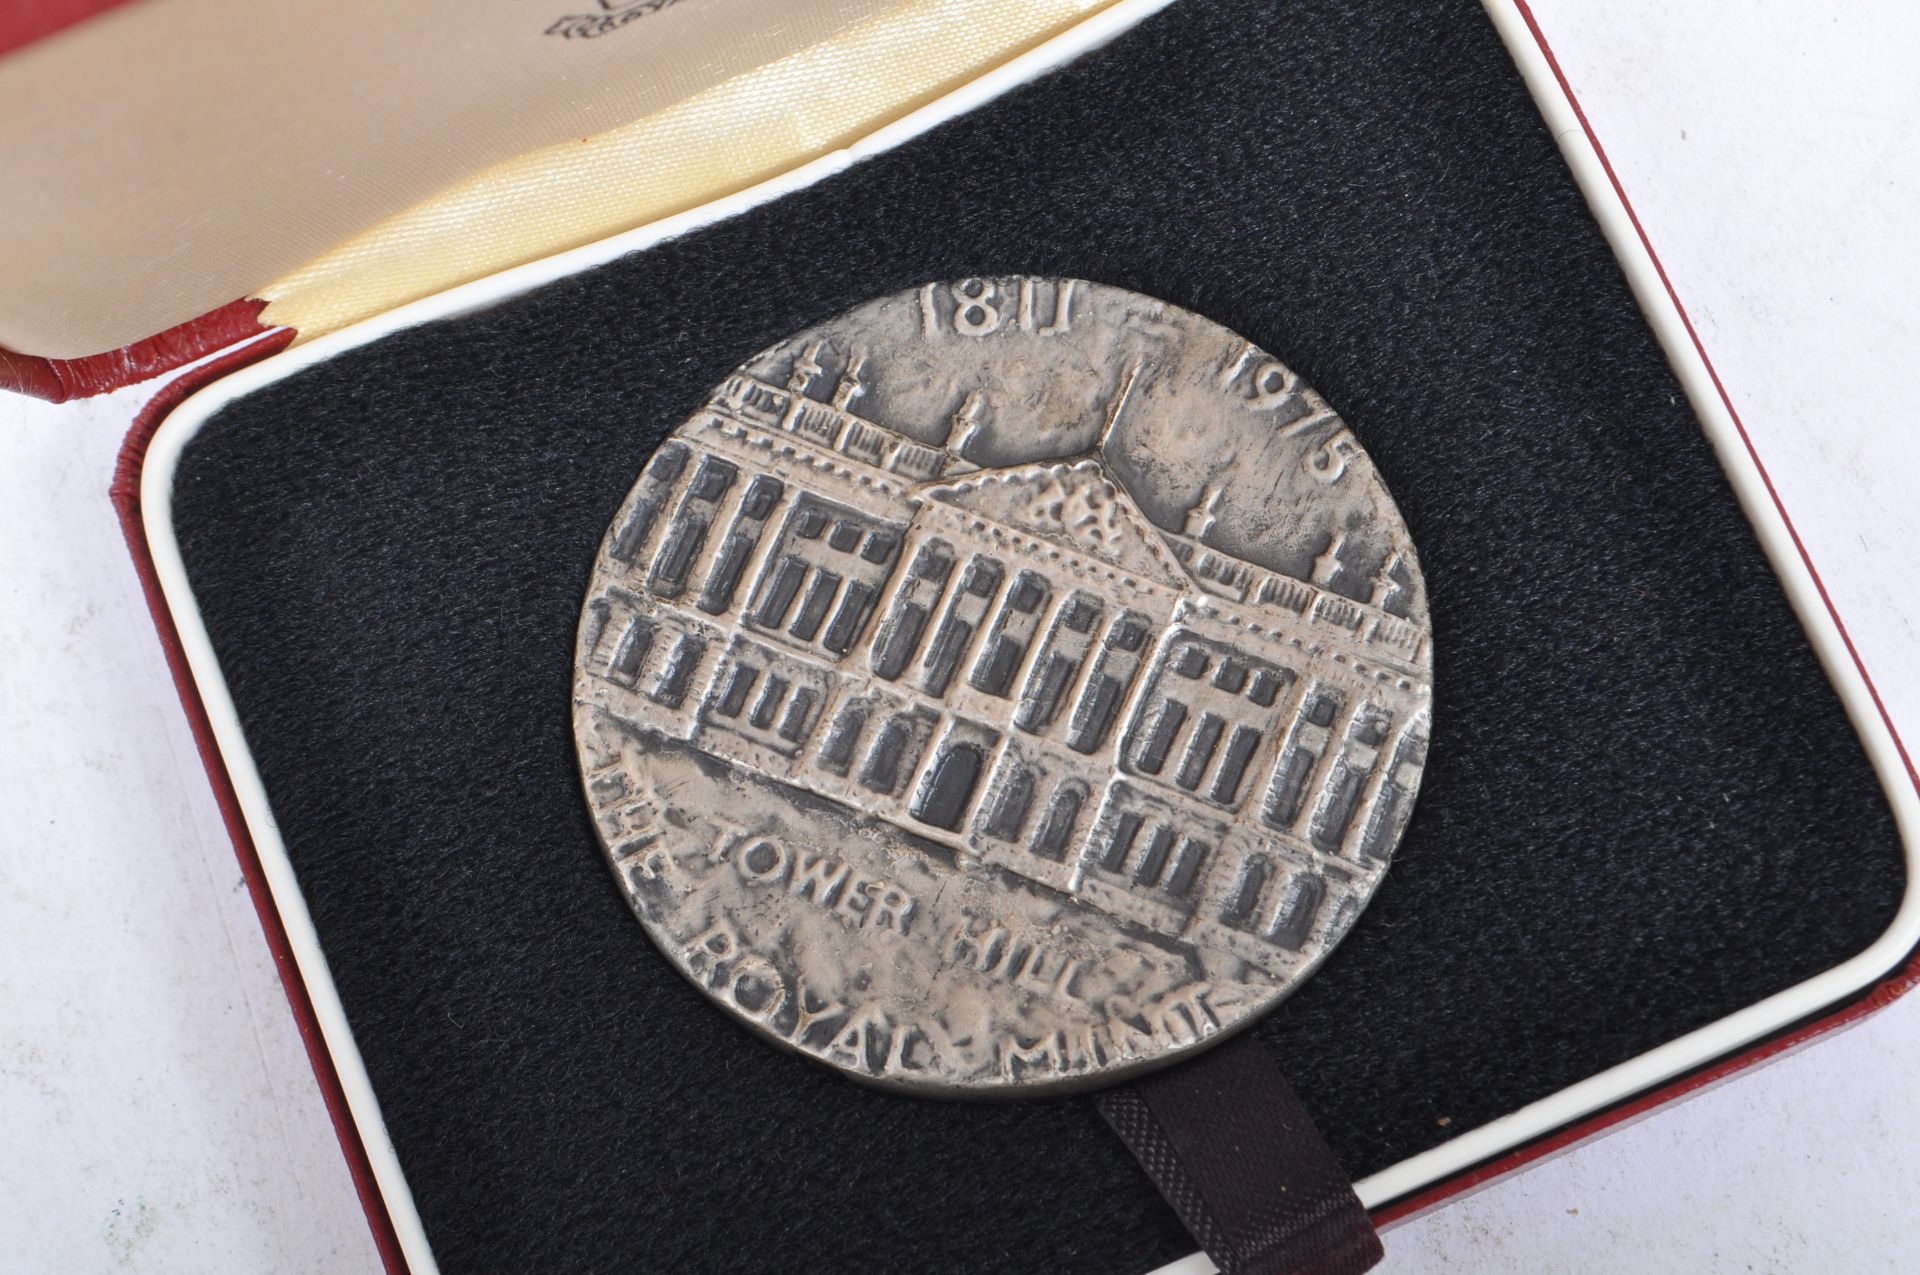 1975 ROYAL MINT TOWER HILL END OF PRODUCTION MEDALS - Image 7 of 7